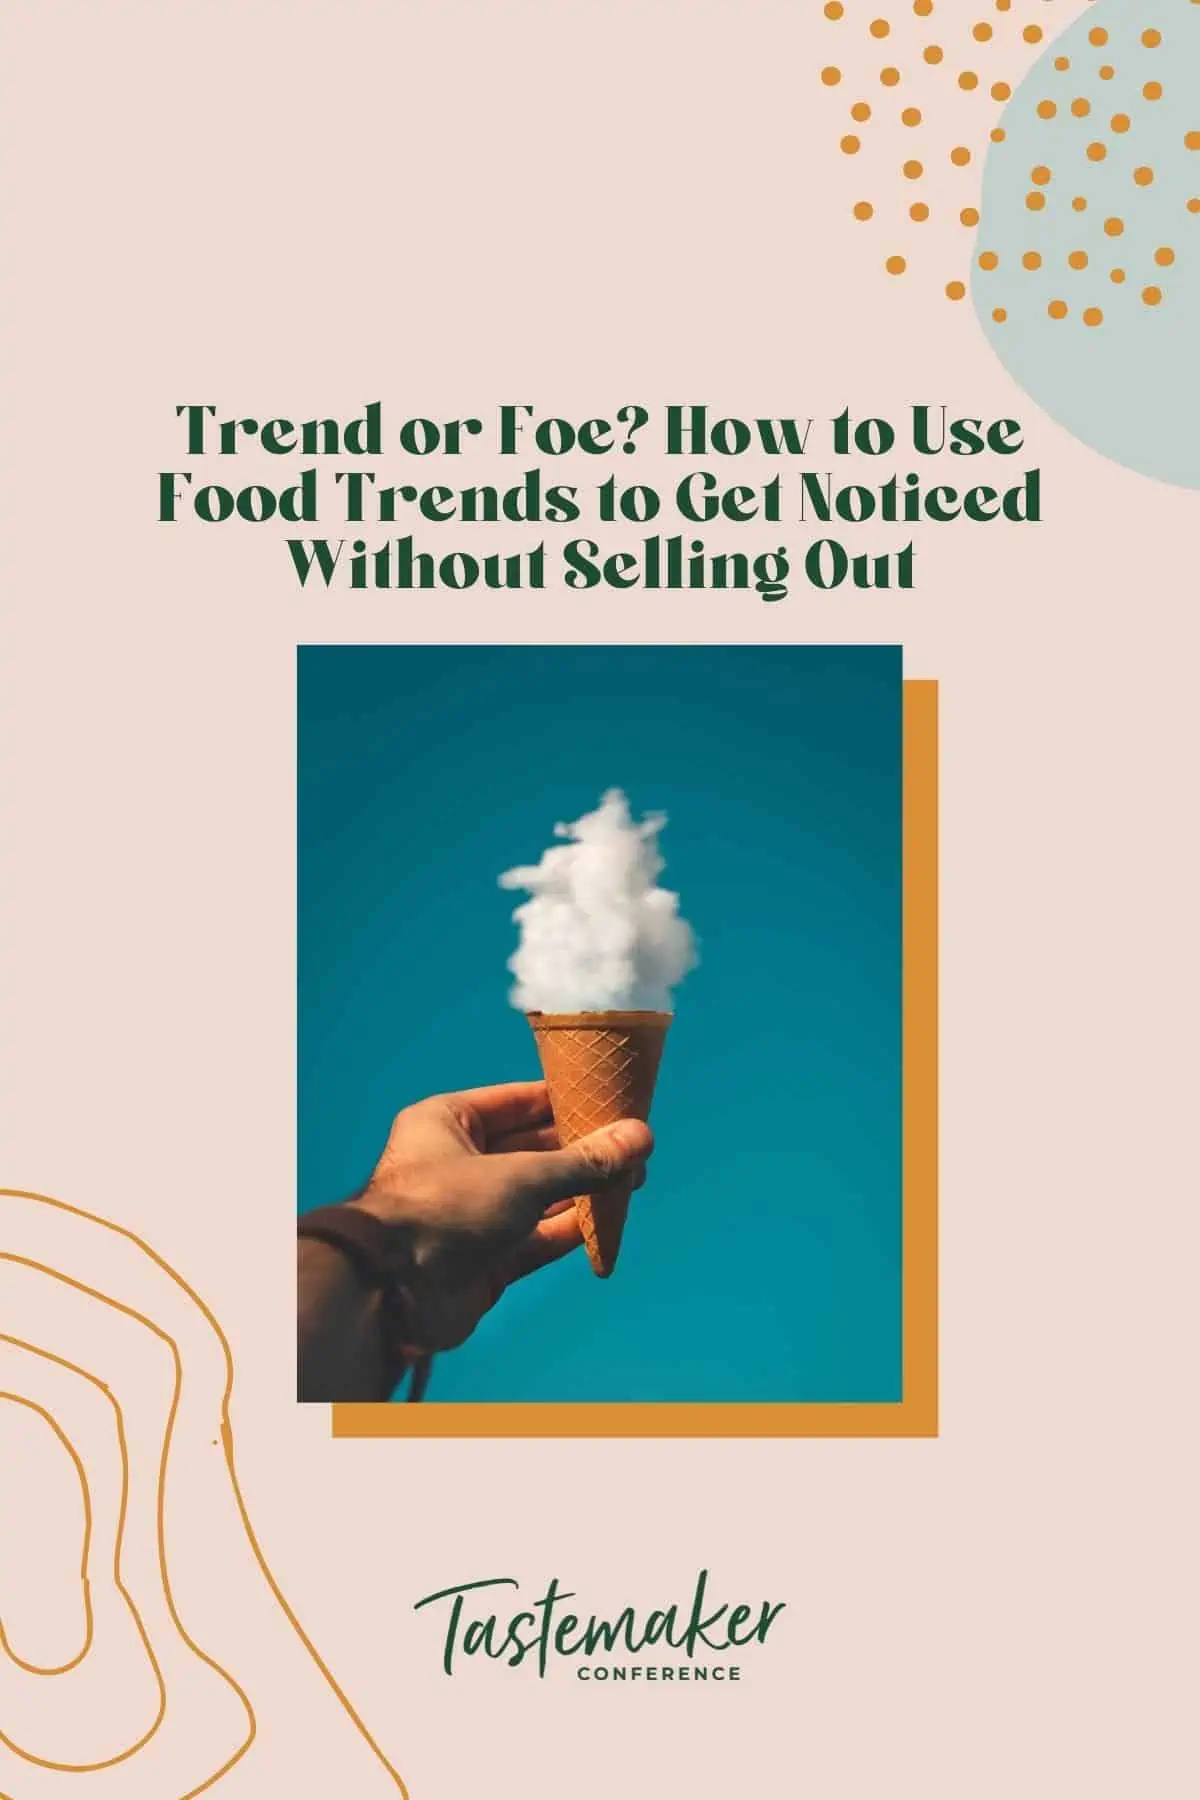 graphic with blog post title and image of man holding ice cream cone under cloud